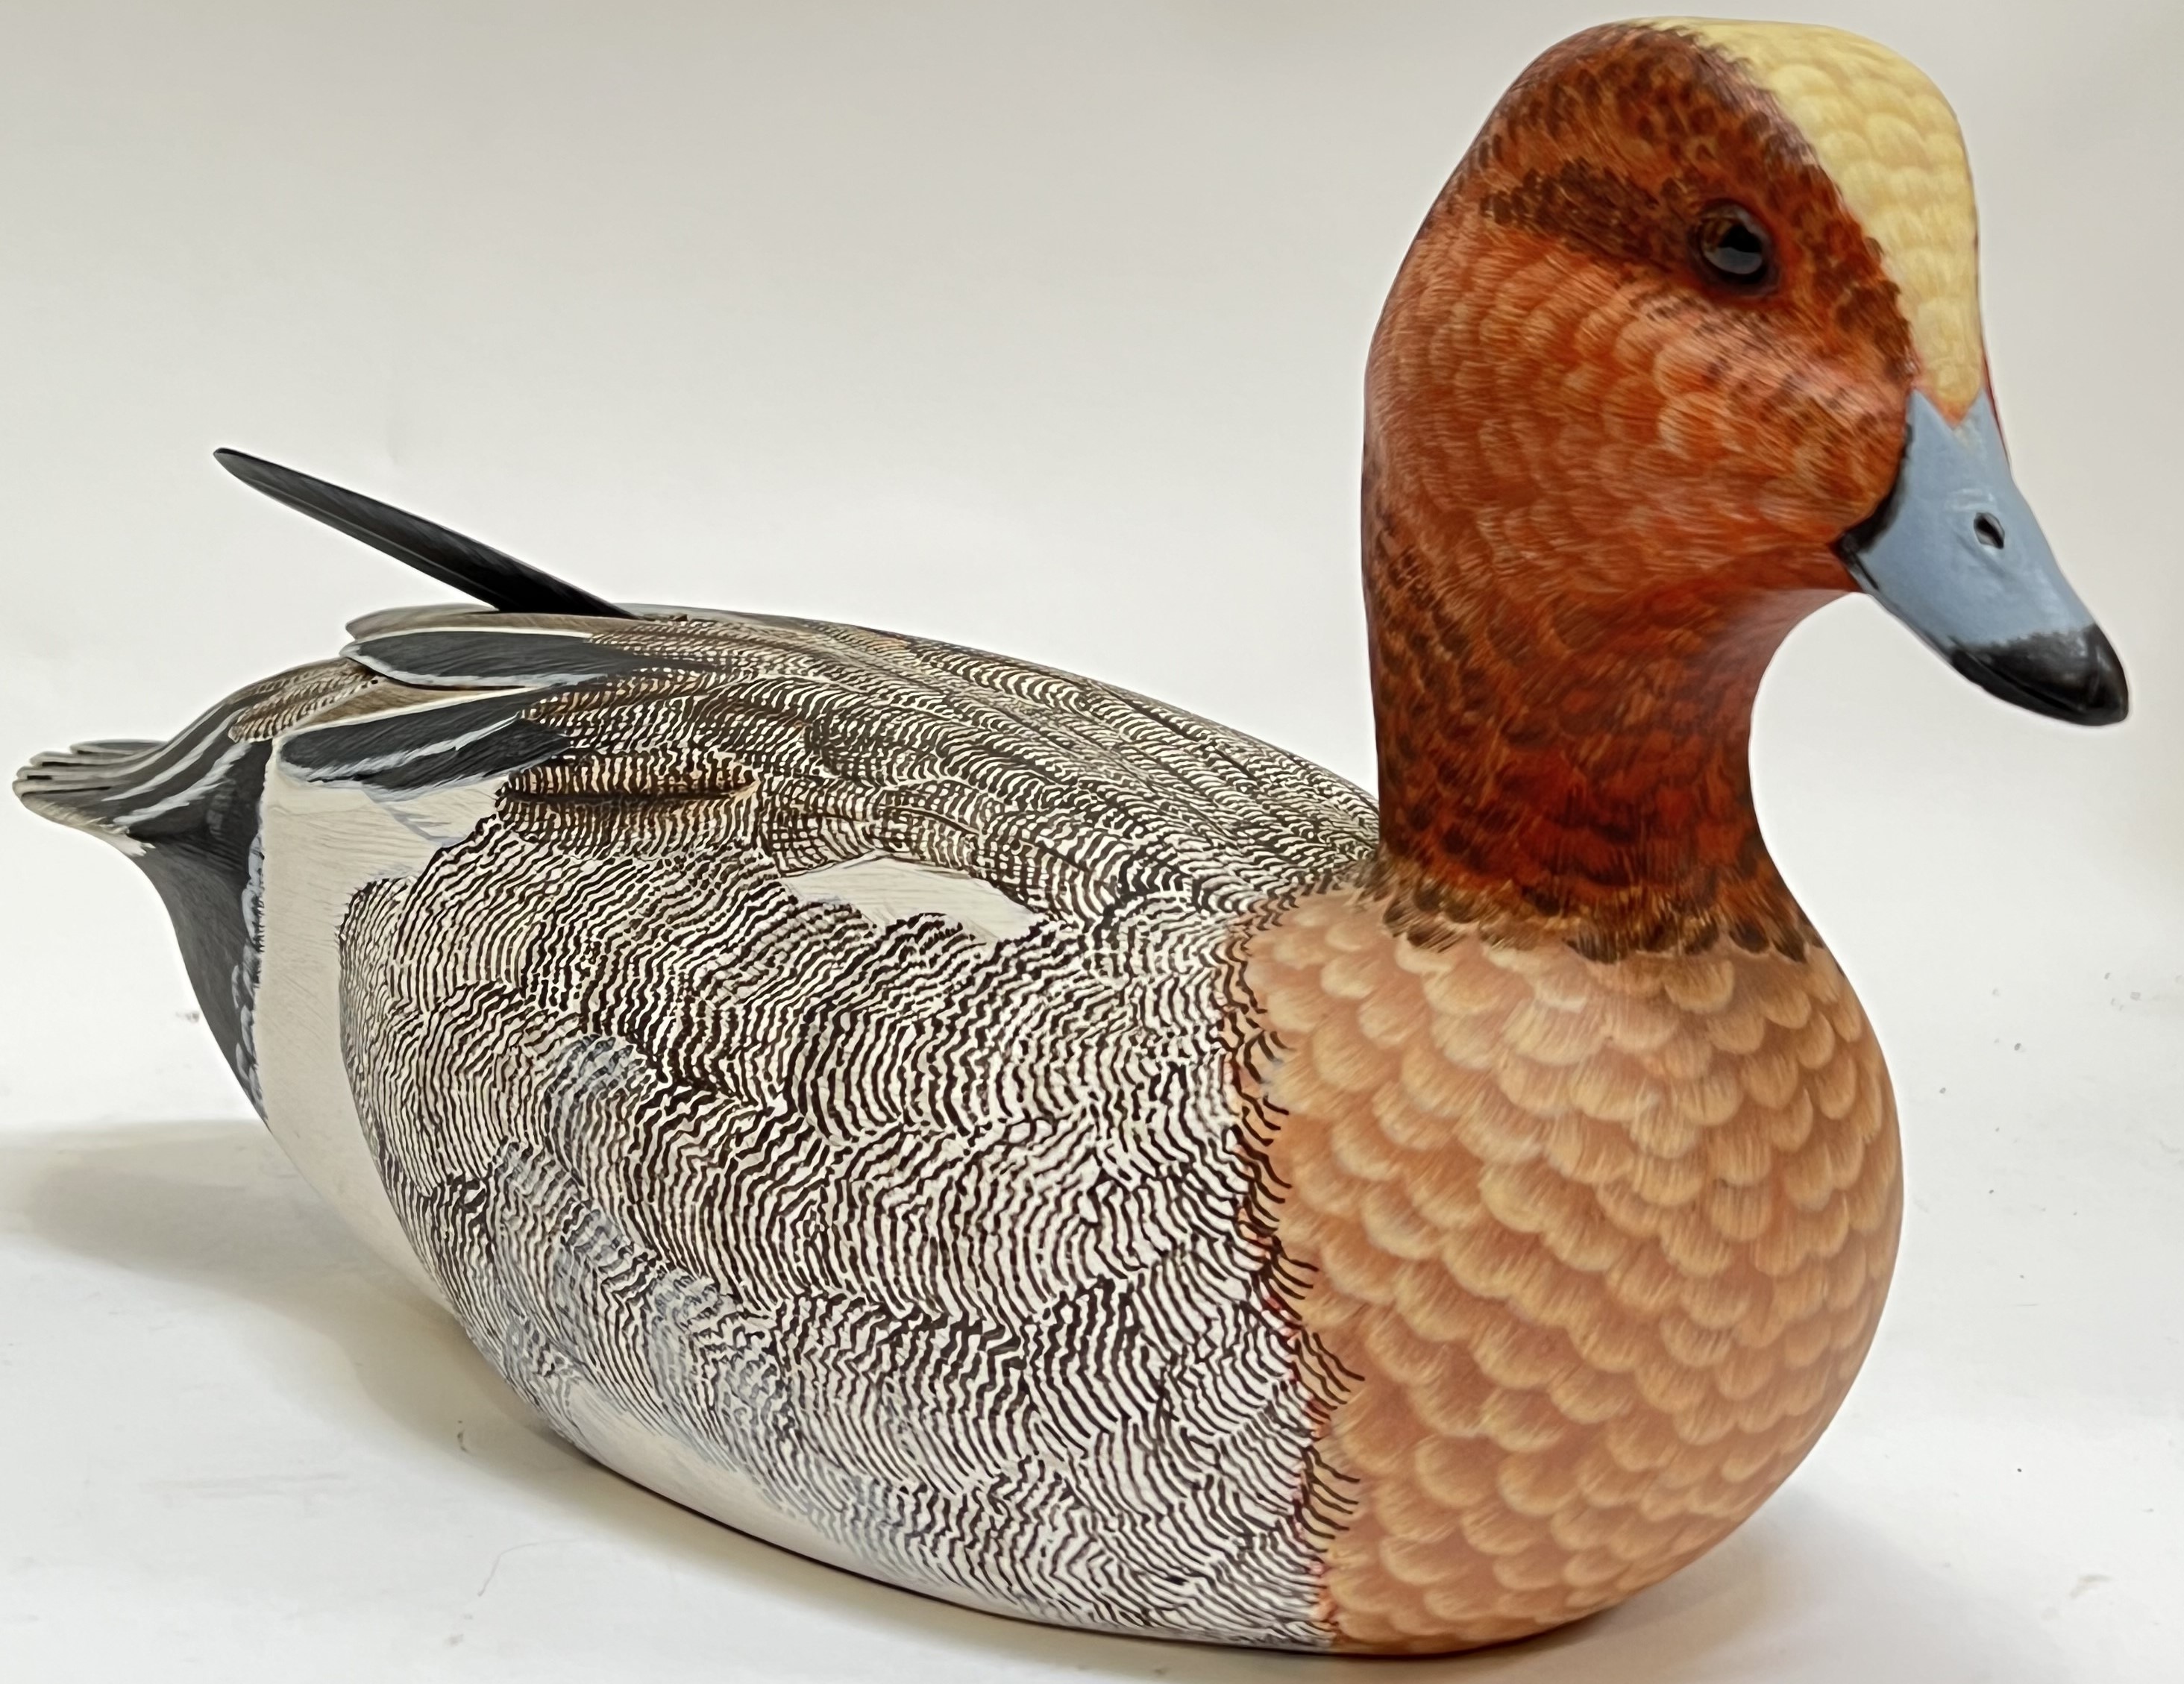 A fine quality hand-painted wooden duck decoy with glass eyes by Mike Wood (h- 18cm, w- 36cm)